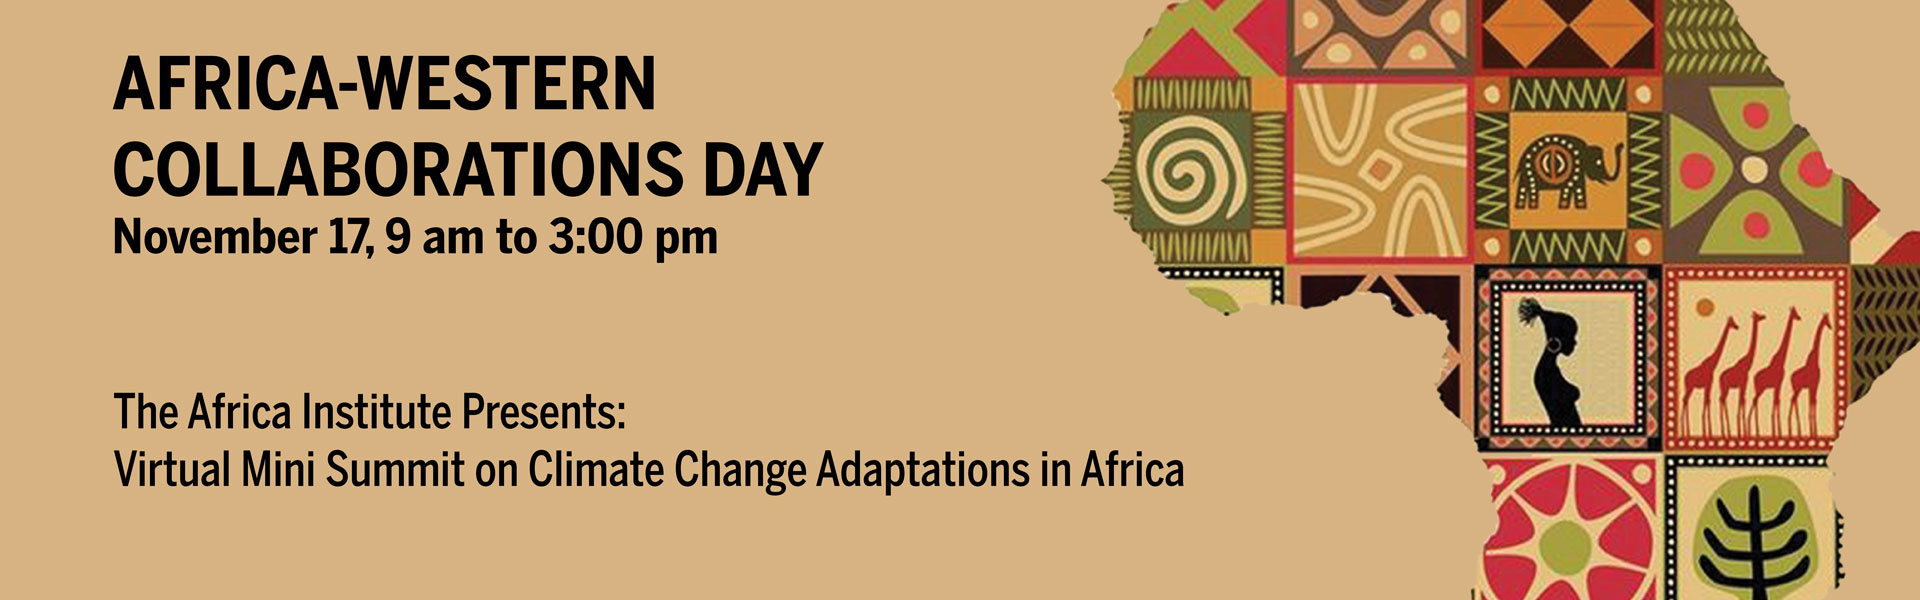 Africa-Western Collaborations day, November 17, 9am to 3pm. The Africa Institute presents: virtual mini summit on climate change adaptations in Africa. Outline of Africa on the right with patterned quilt with images relating to African art.